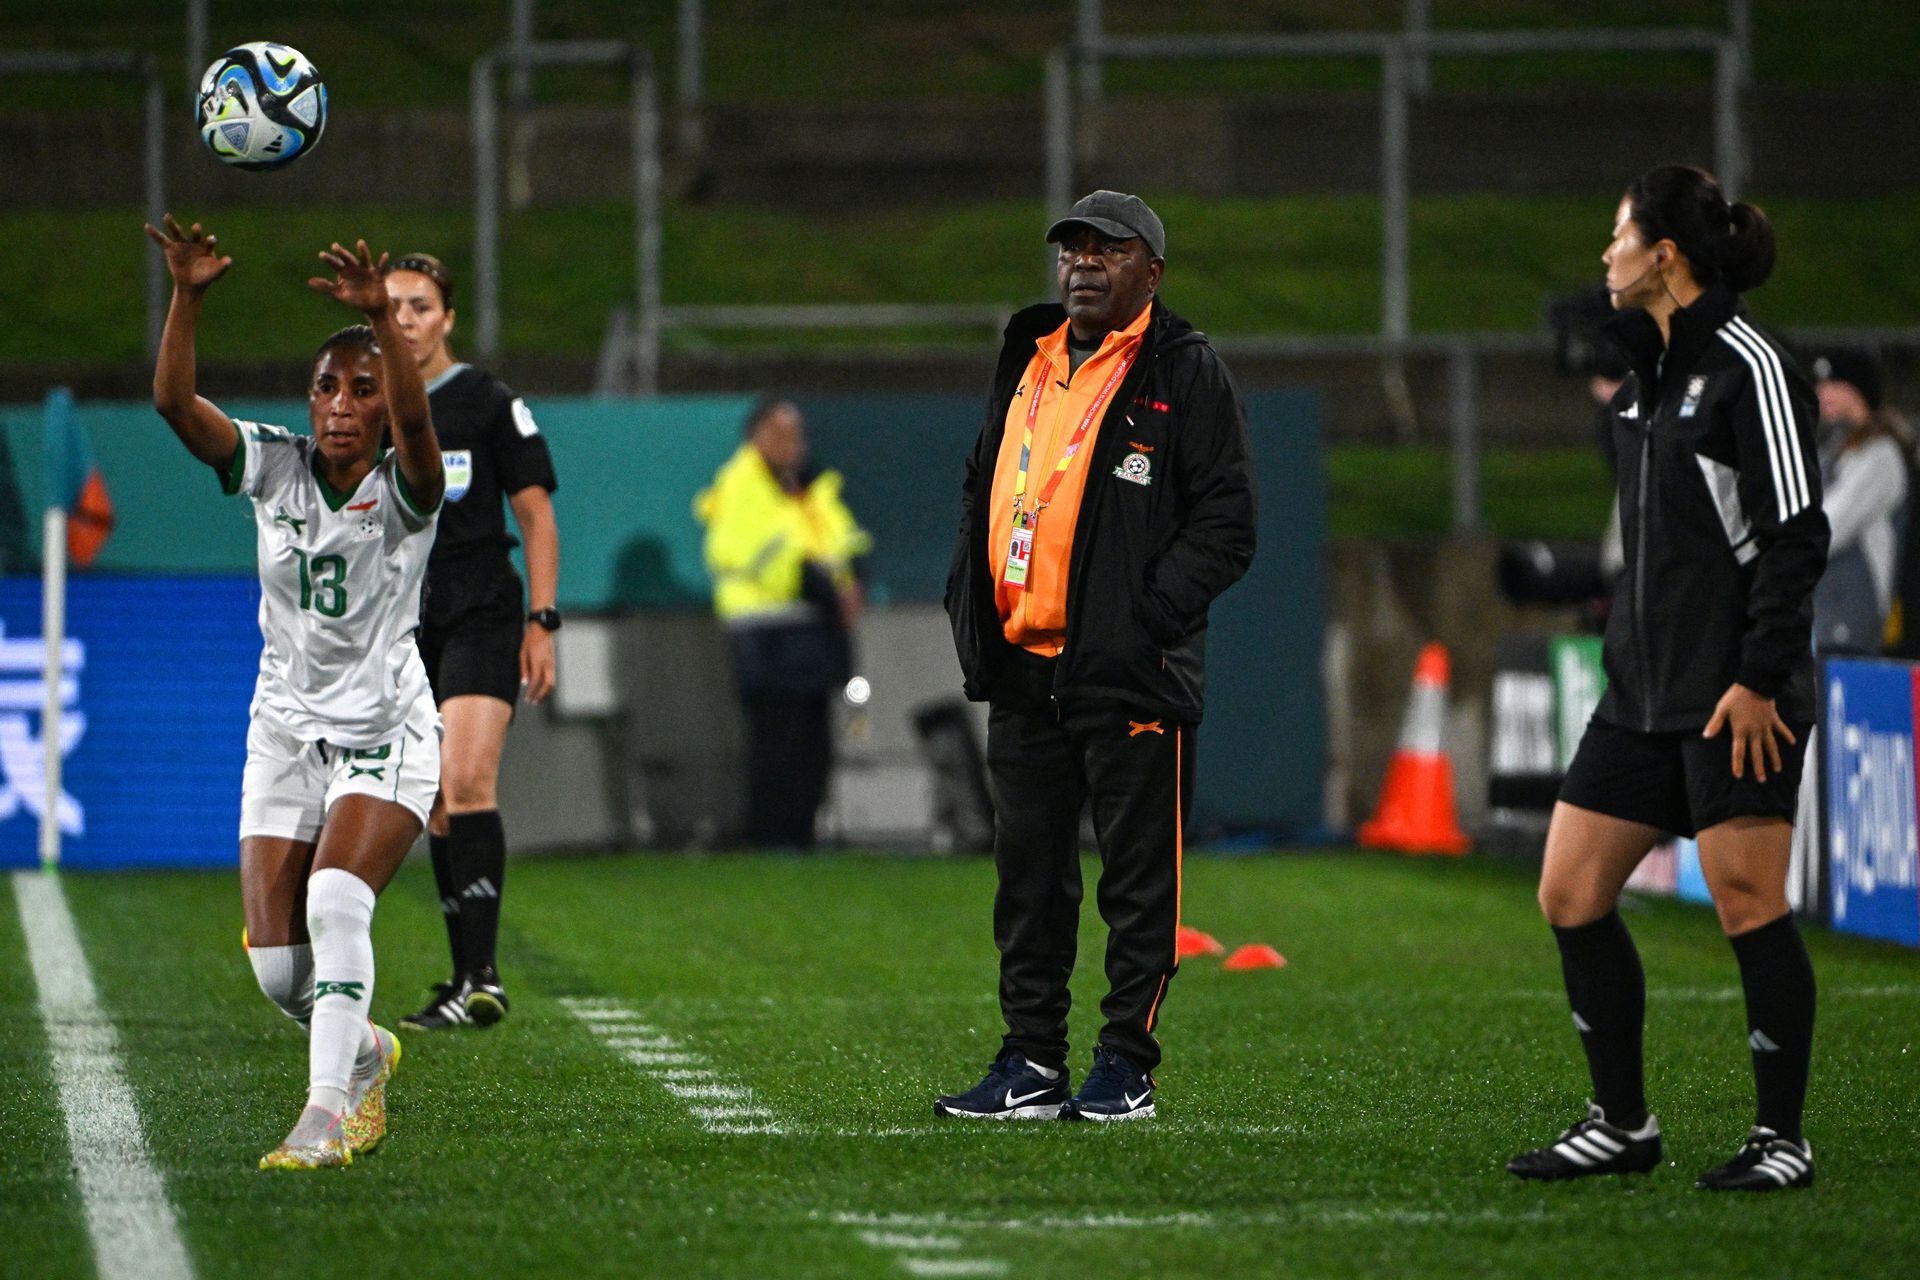 Zambia's coach Bruce Mwape (C) looks on as Zambia's defender #13 Martha Tembo (L) plays a ball during the Australia and New Zealand 2023 Women's World Cup Group C football match between Costa Rica and Zambia at Waikato Stadium in Hamilton on July 31, 2023. (Photo by Saeed KHAN / AFP)